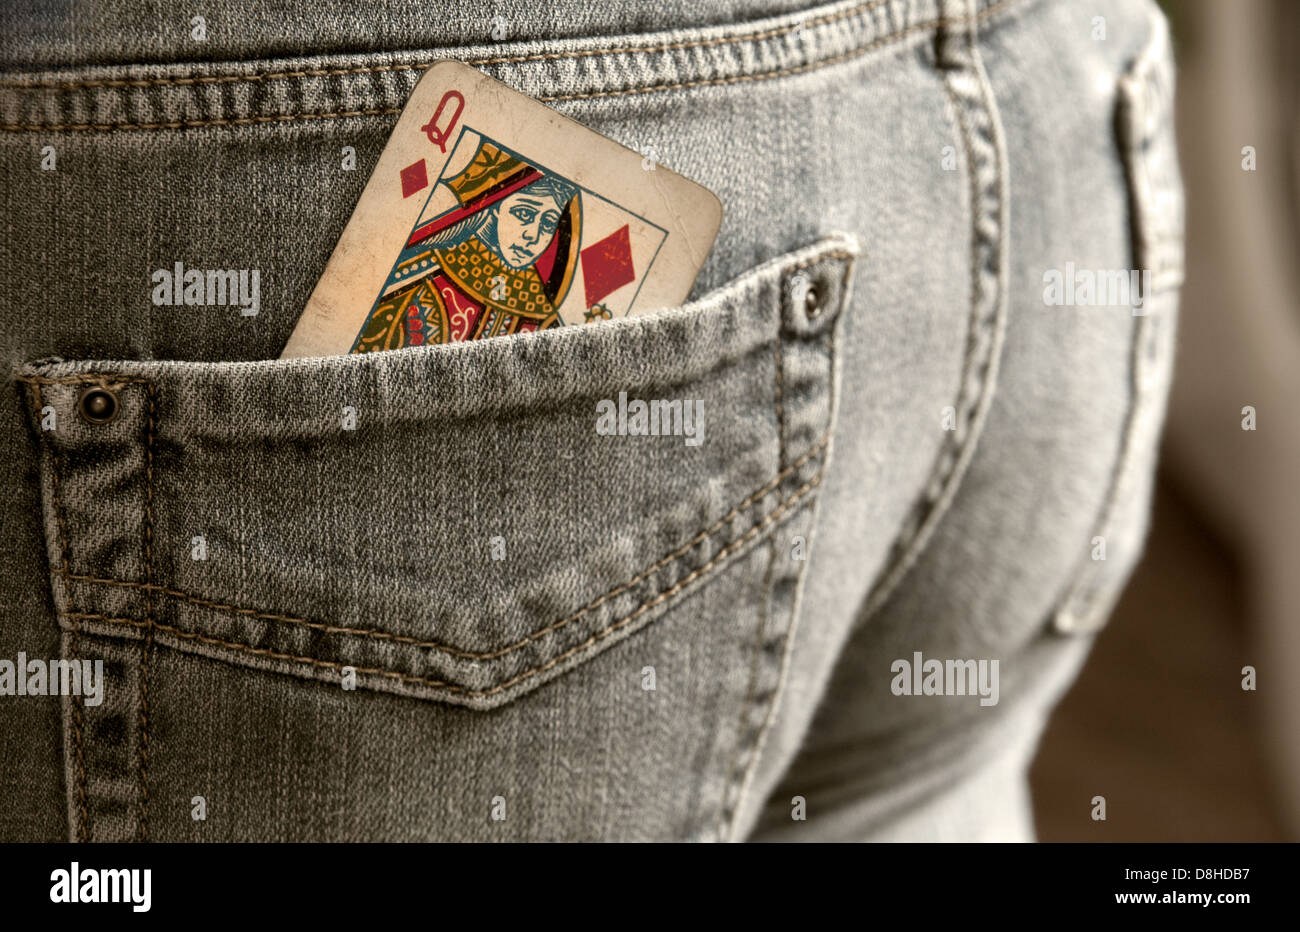 How to gamble Queen of diamonds playing card in a back pocket of a pair of jeans Stock Photo